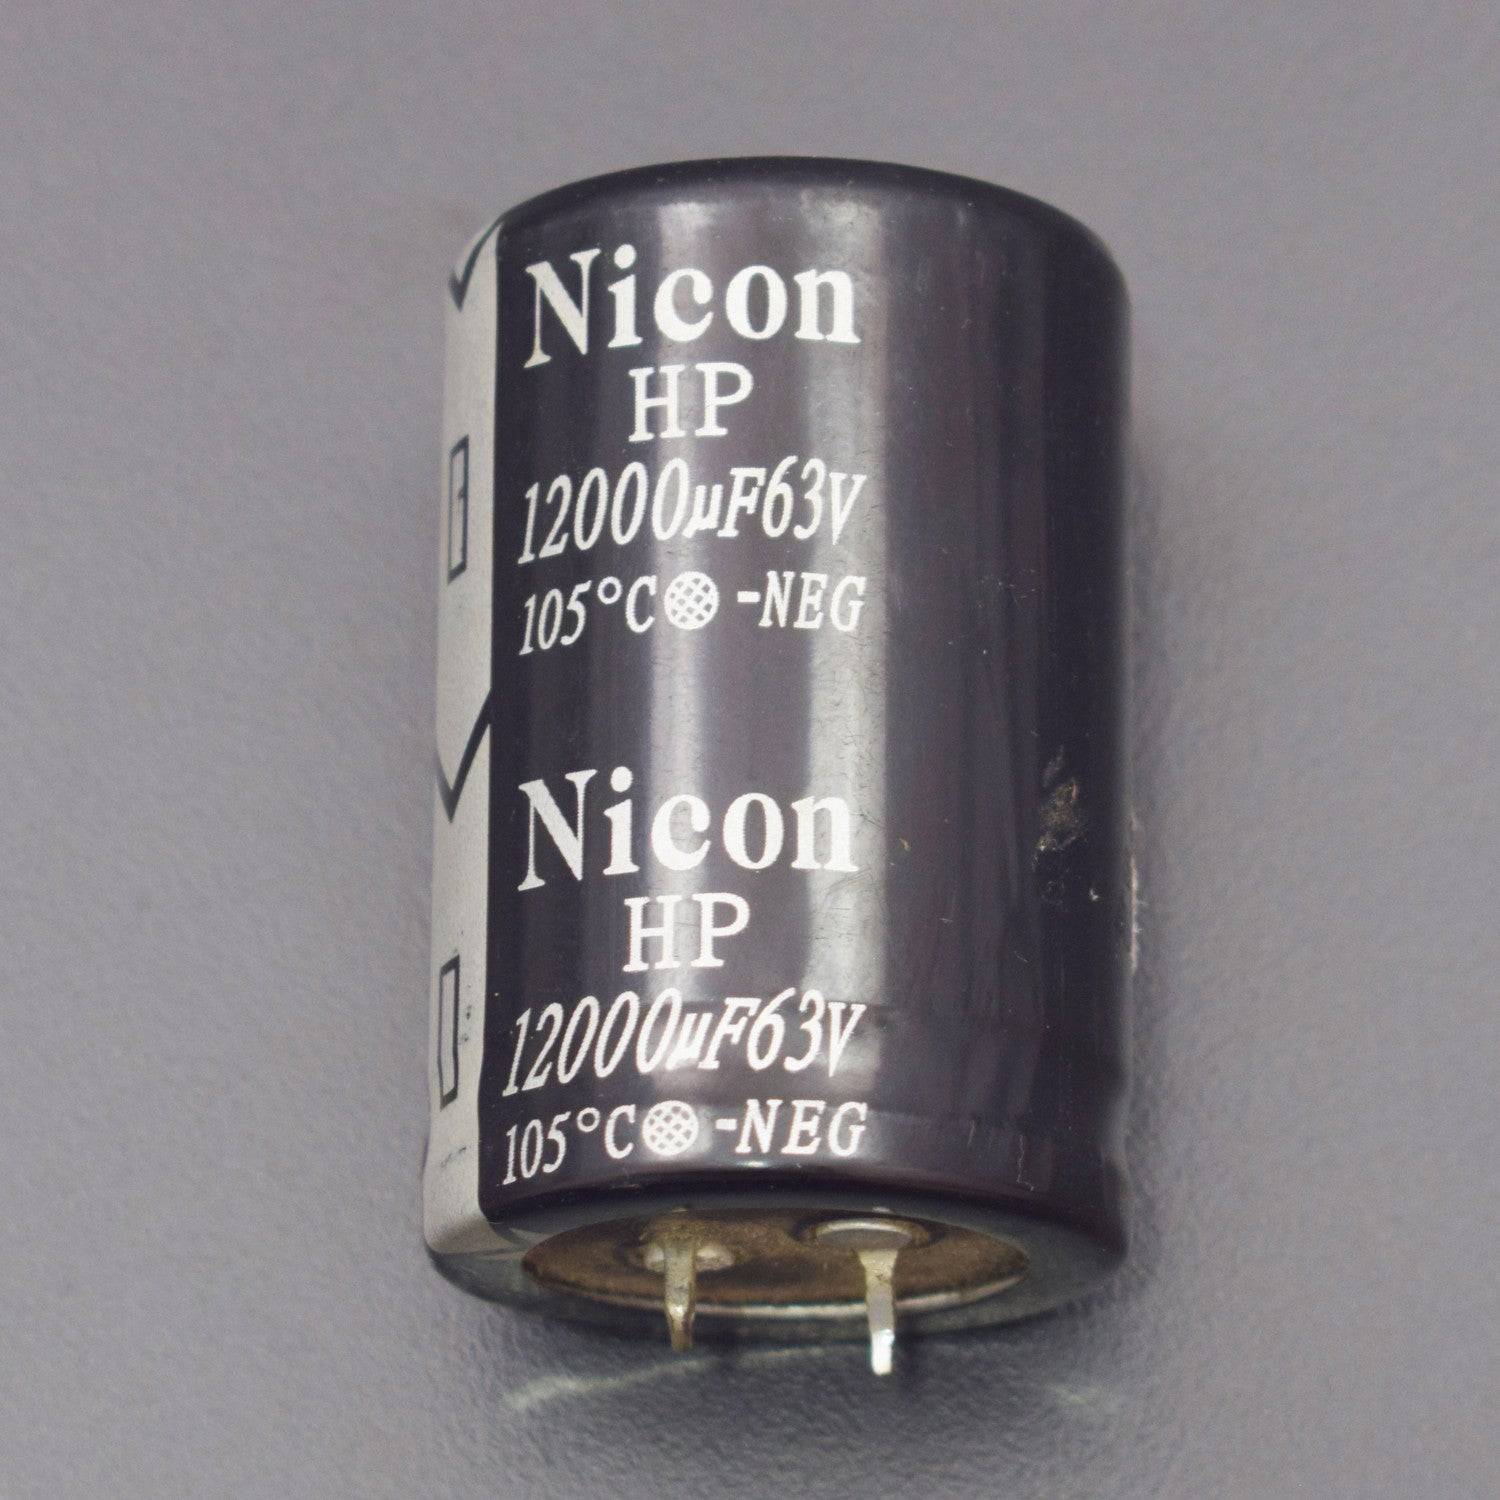 12000uF 63V Aluminum Electrolytic Capacitor 105 Degree Celsius Dimension 35x50mm Cylindrical - RS1426 - REES52